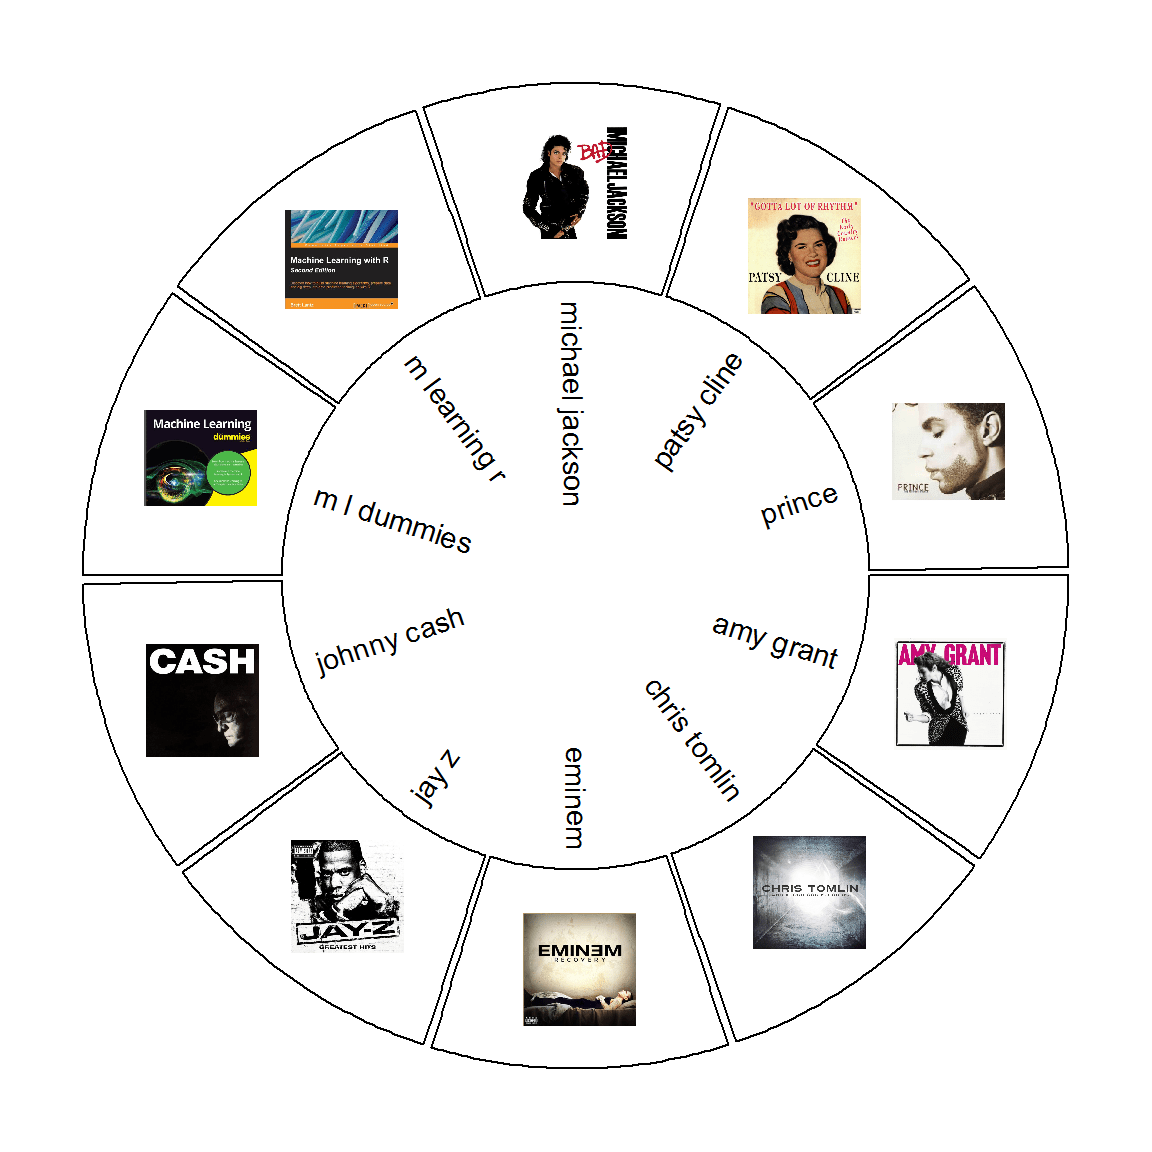 album/book cover for each of the artists/authors in the data